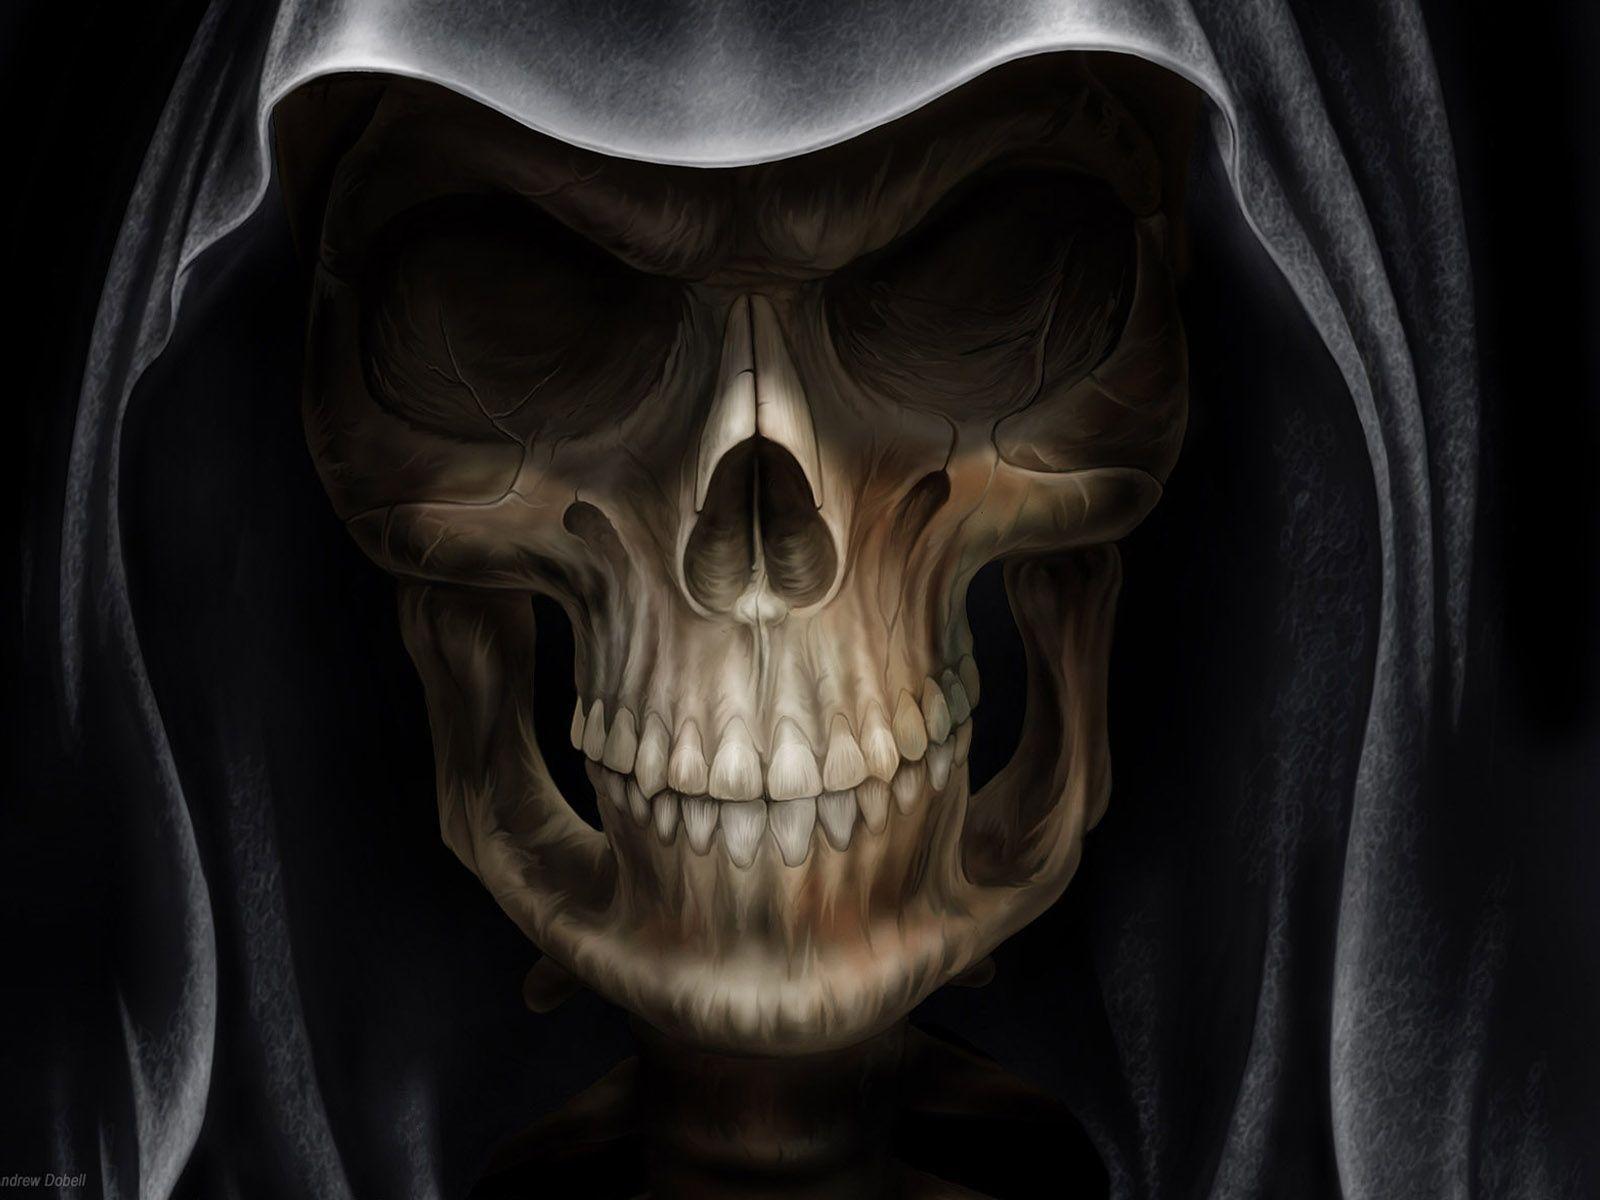 Picture Of Cool Skulls Wallpaper HD 1600x1200PX Awesome Girly